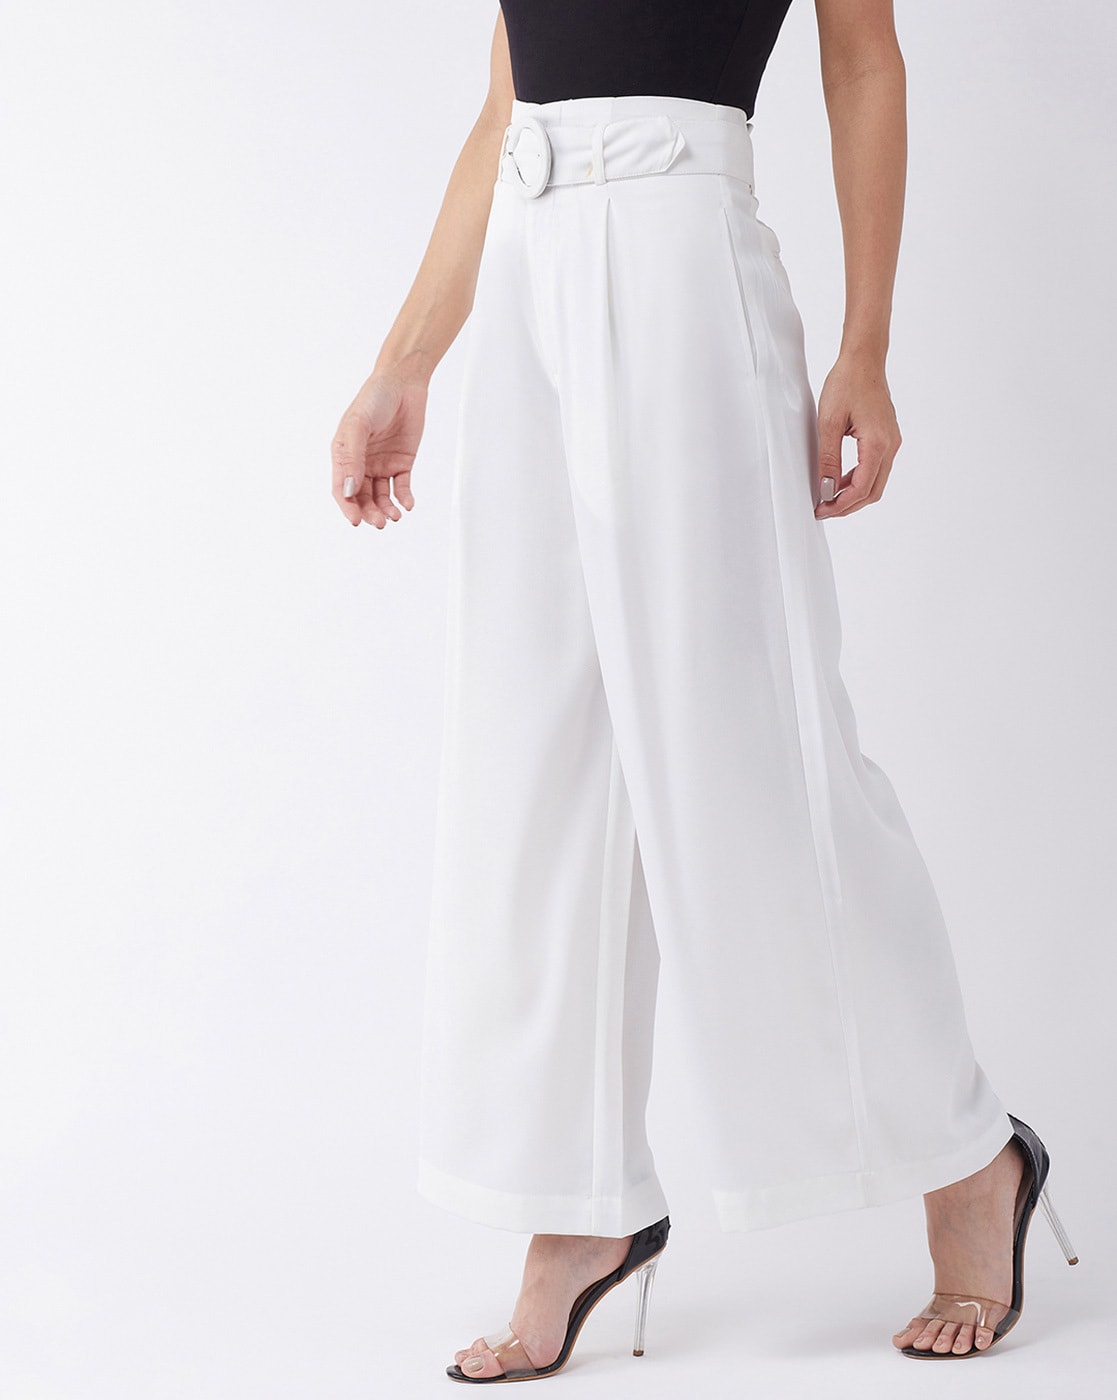 Amalie The Label - Charo High Waisted Wide Leg Pants in Warm White | Showpo  USA